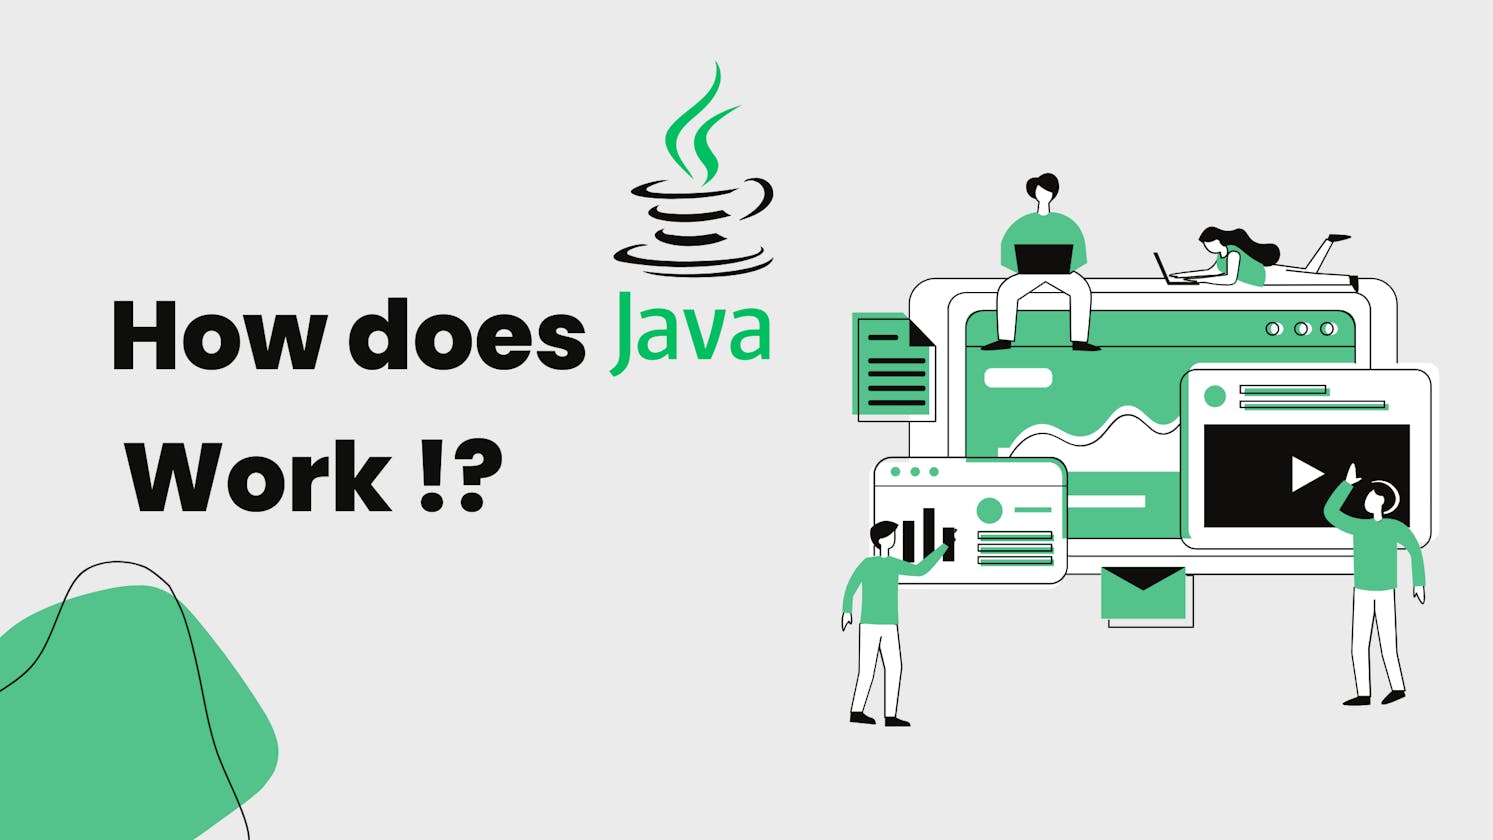 How does Java work?